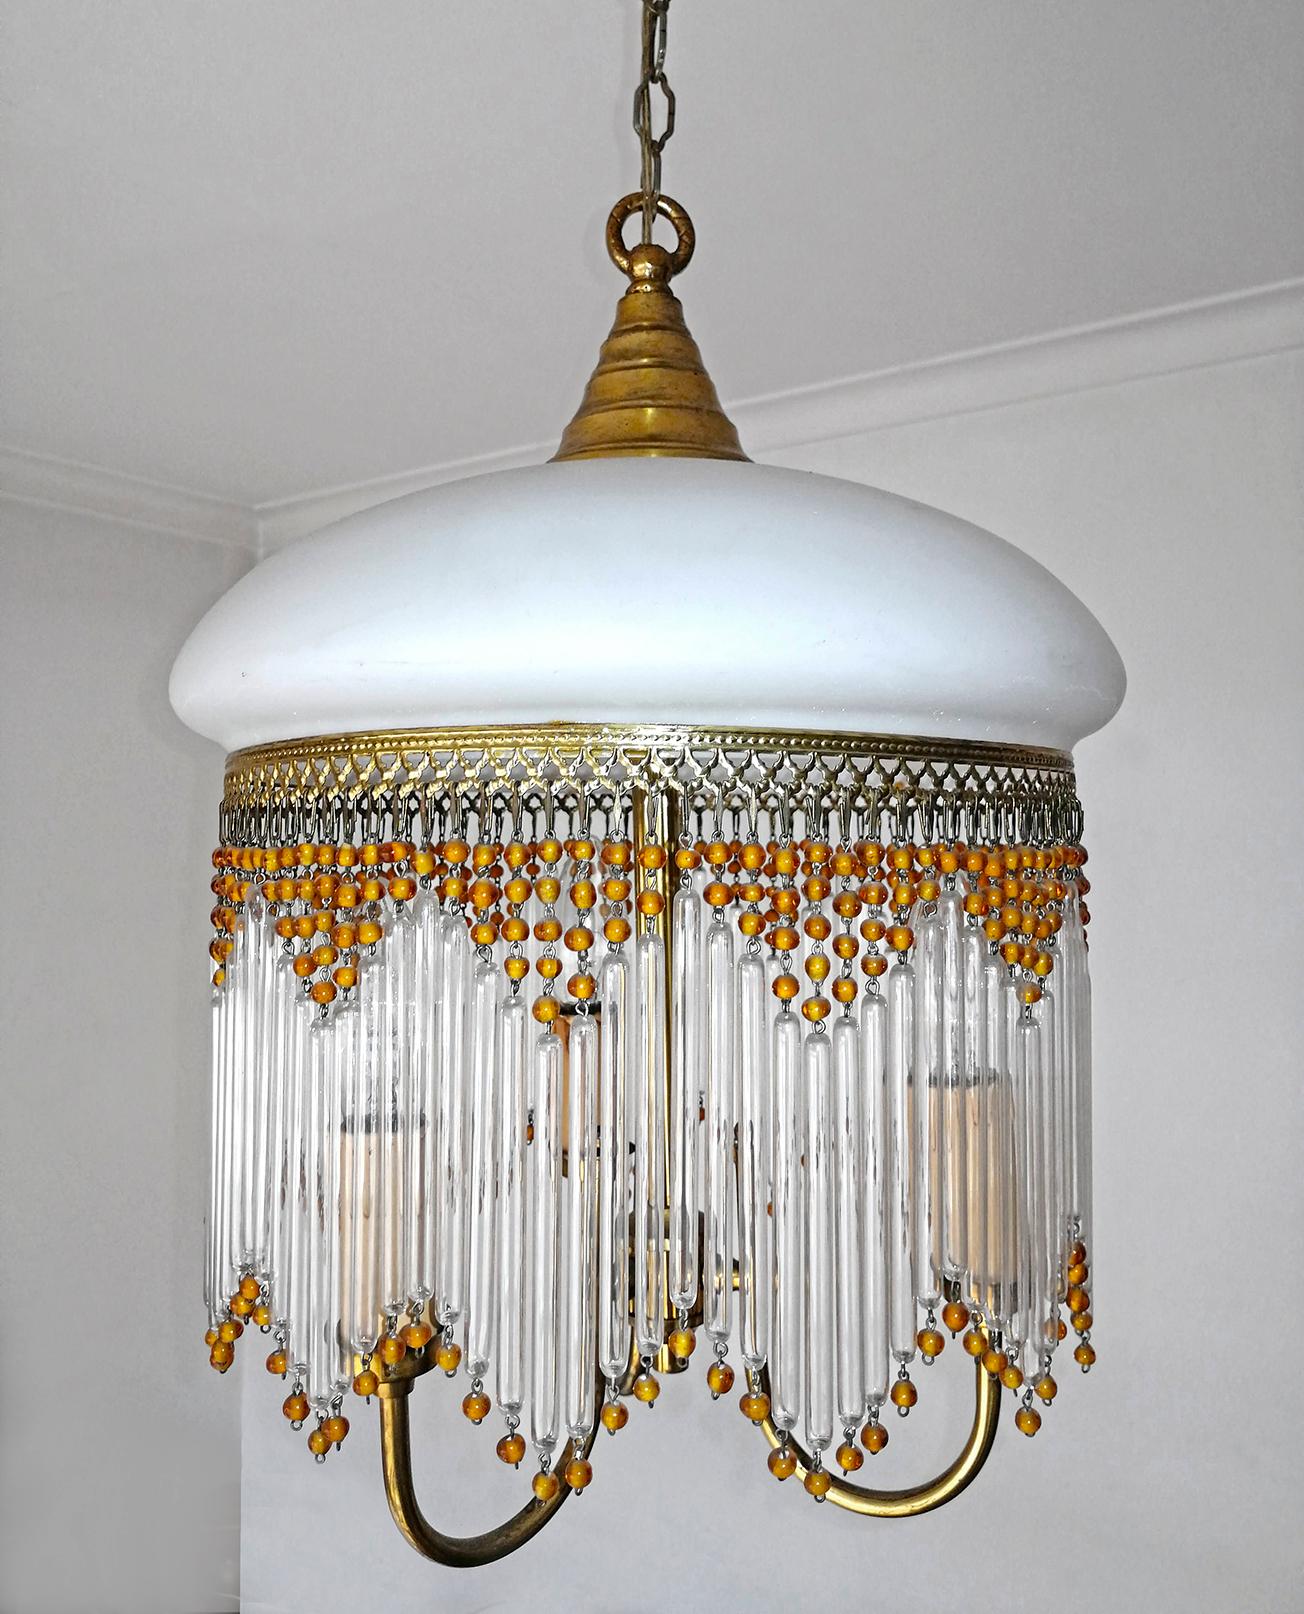 Beautiful Italian midcentury in clear and Murano beaded glass Art Deco / Art Nouveau chandelier.
Measures:
Height 31.5 in. (chain/10 in)/ 80 cm (chain/25 cm)
Diameter 13 in. (33 cm)
3-light bulbs E14/ good working condition.
Age